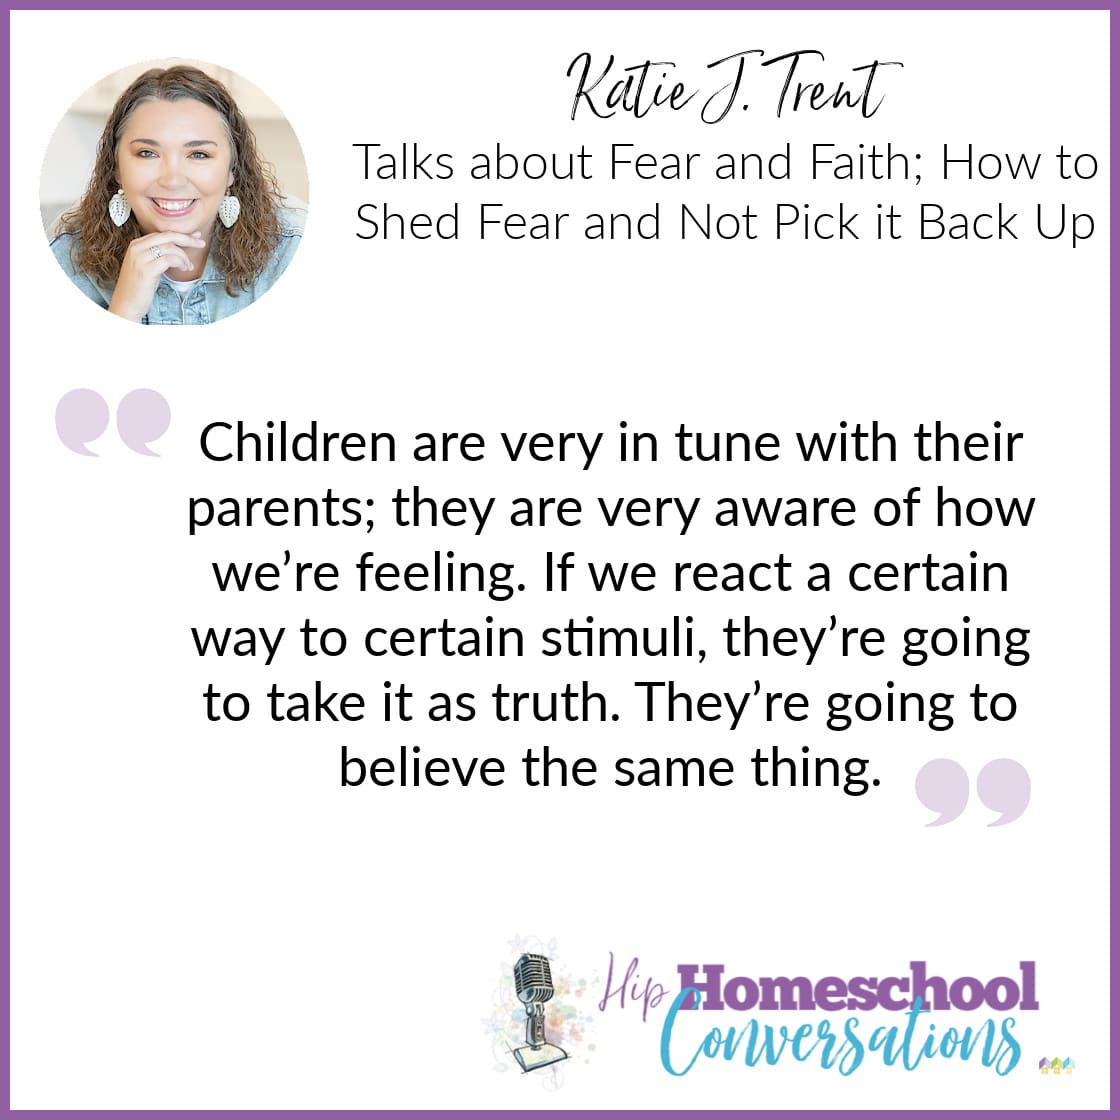 Join in as Trish and Katie consider ways in which fear can impact our lives, our children’s lives, and our homeschools. Katie shares her thoughts on the ways in which fear can manifest itself daily, both physically and emotionally.